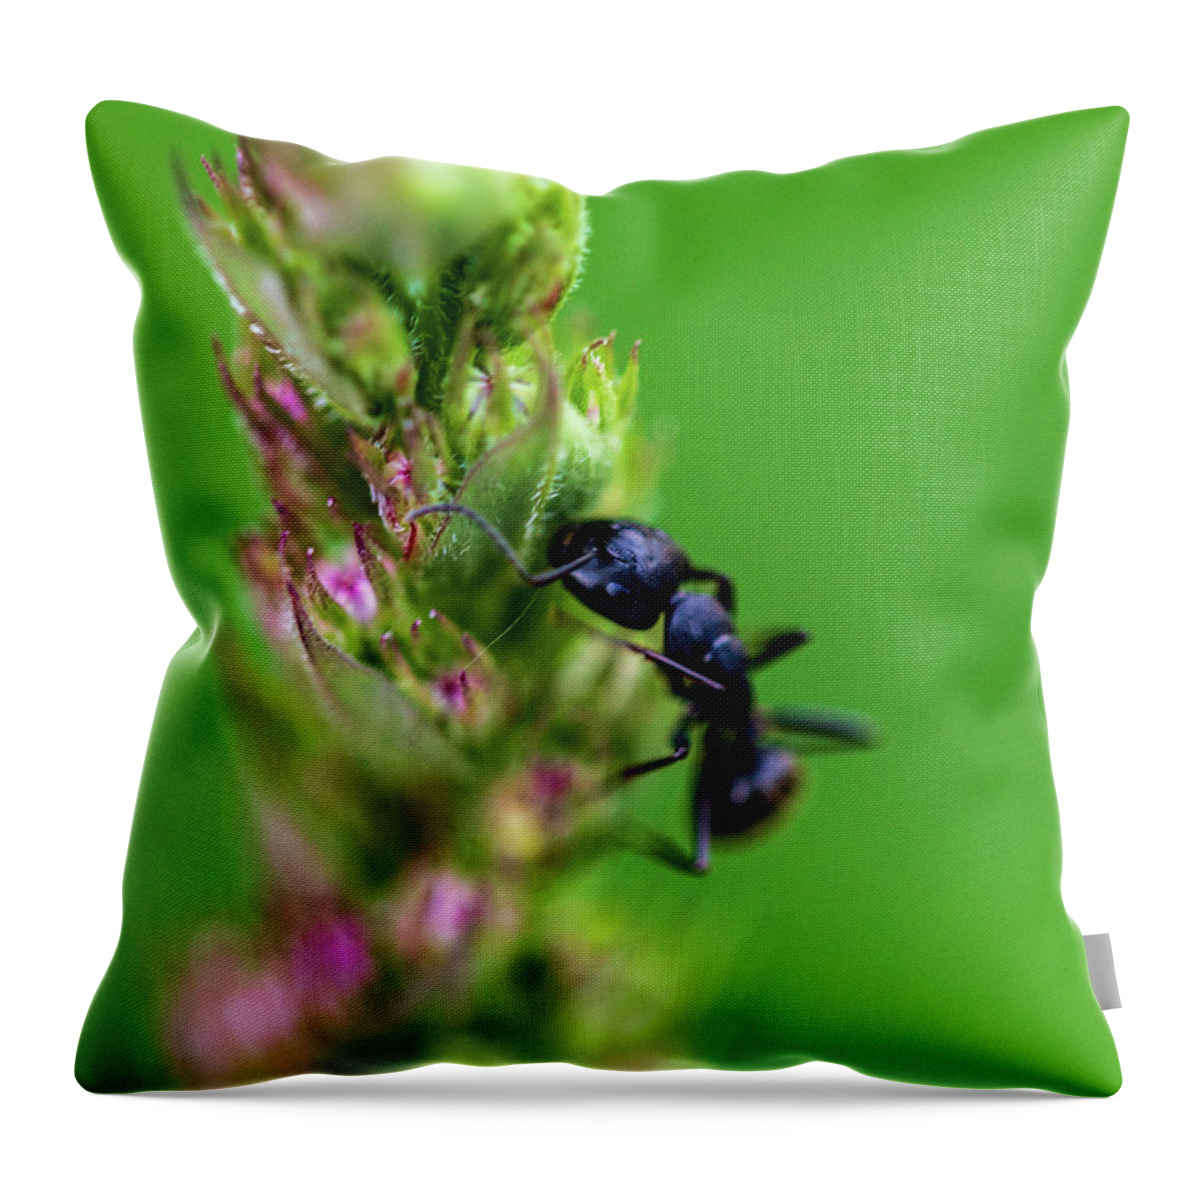 Animals Throw Pillow featuring the photograph Macro Photography - Ant by Amelia Pearn